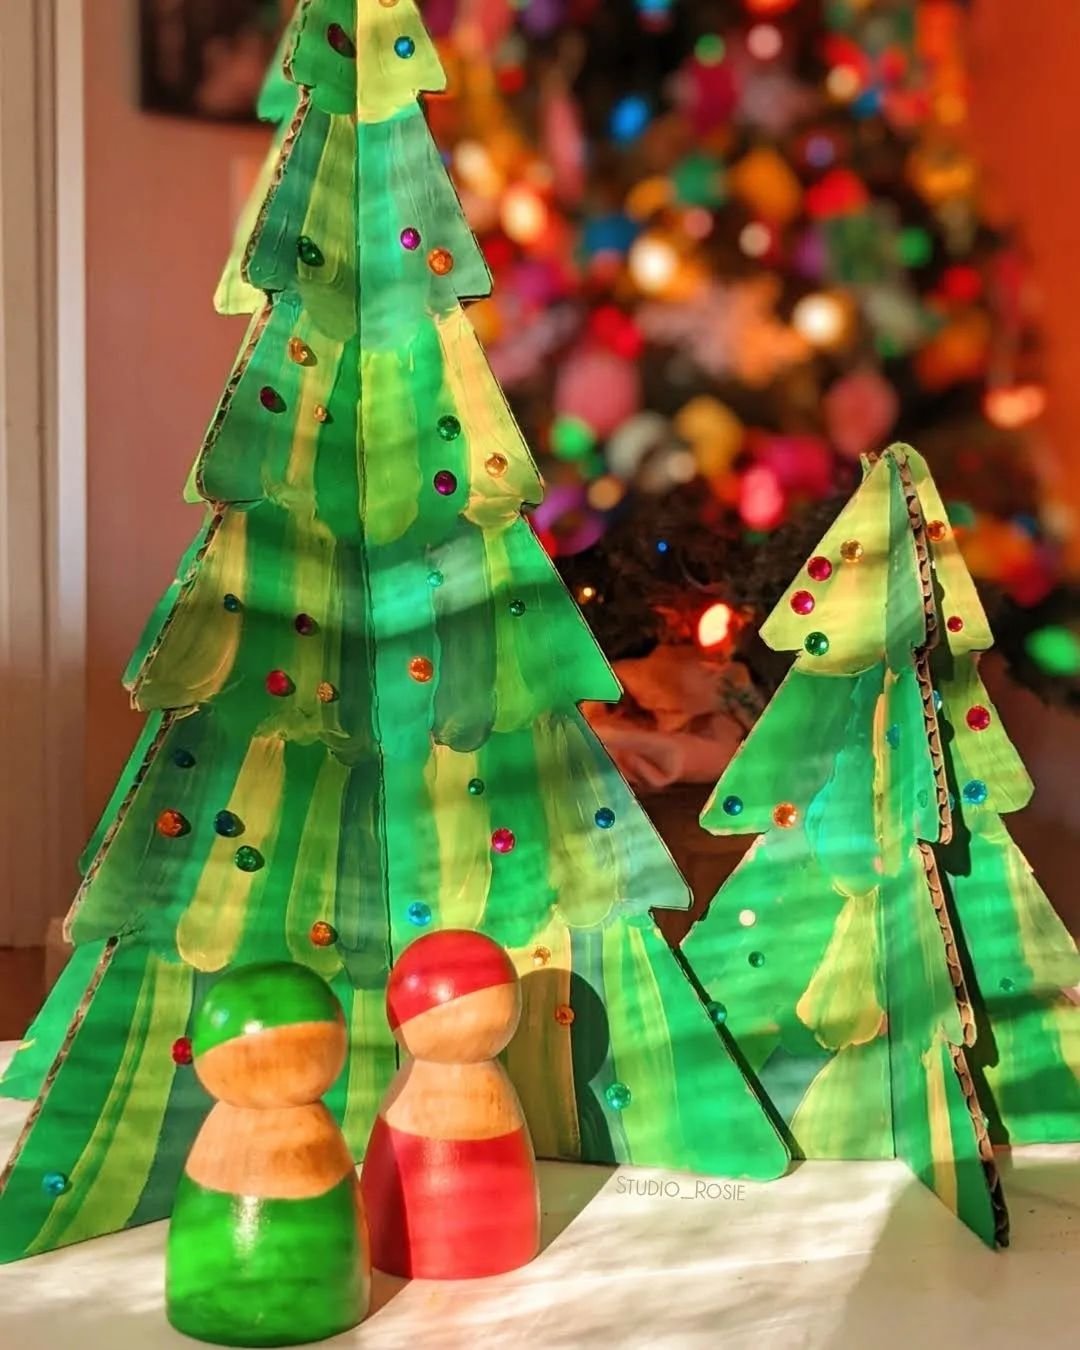 Festive scene with a cardboard Christmas tree and two wooden figures.